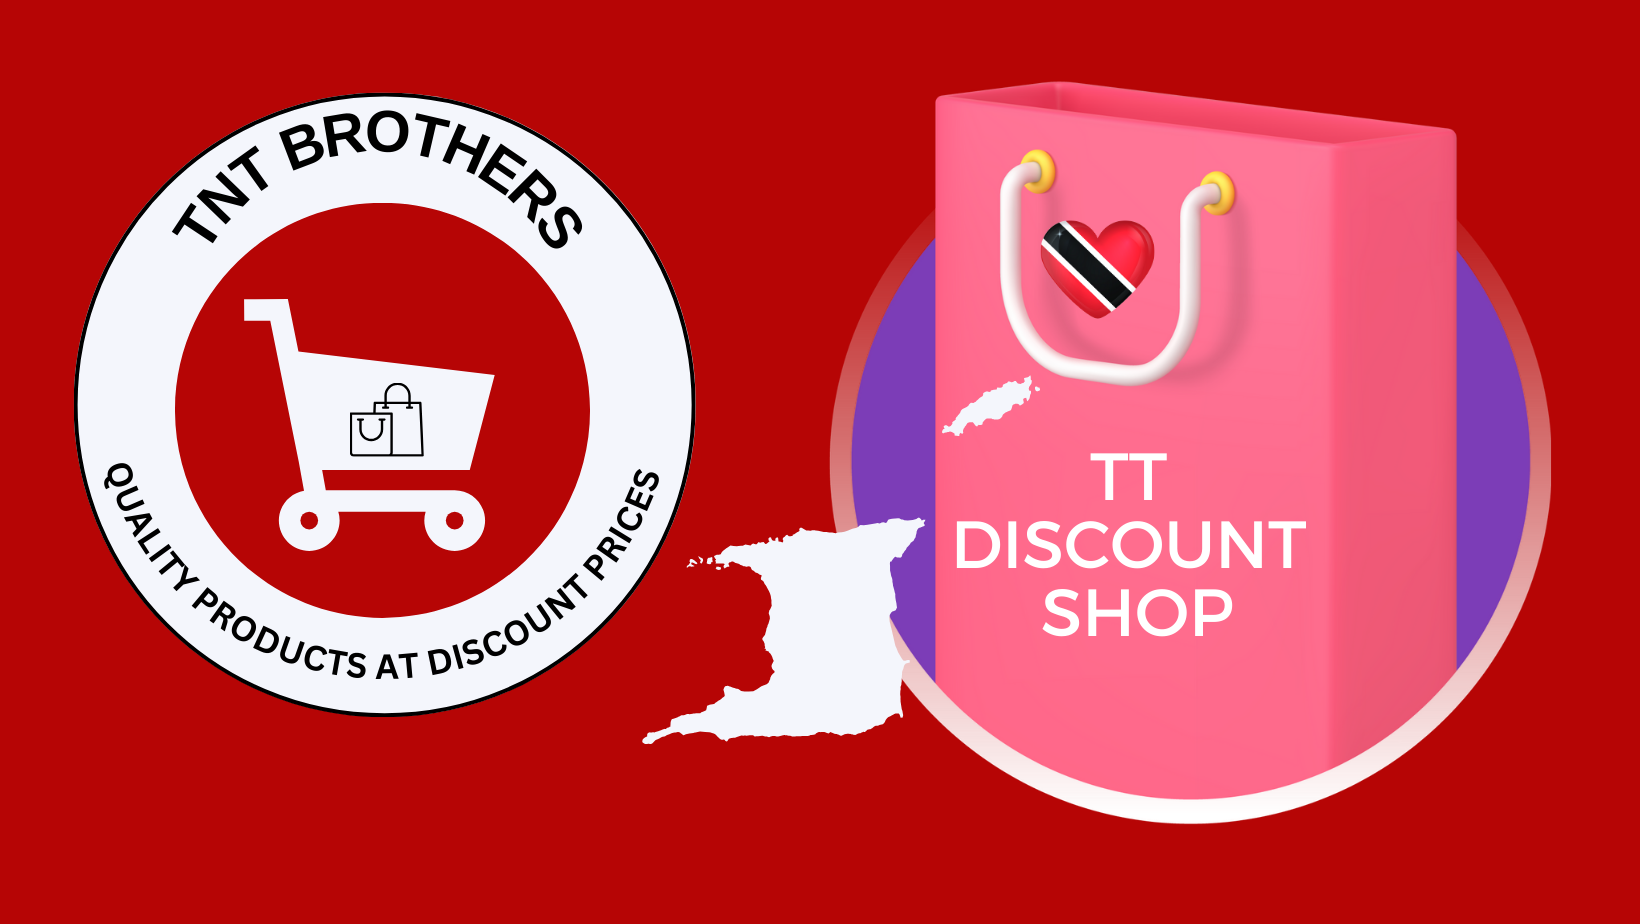 TNT BROTHERS SHOP